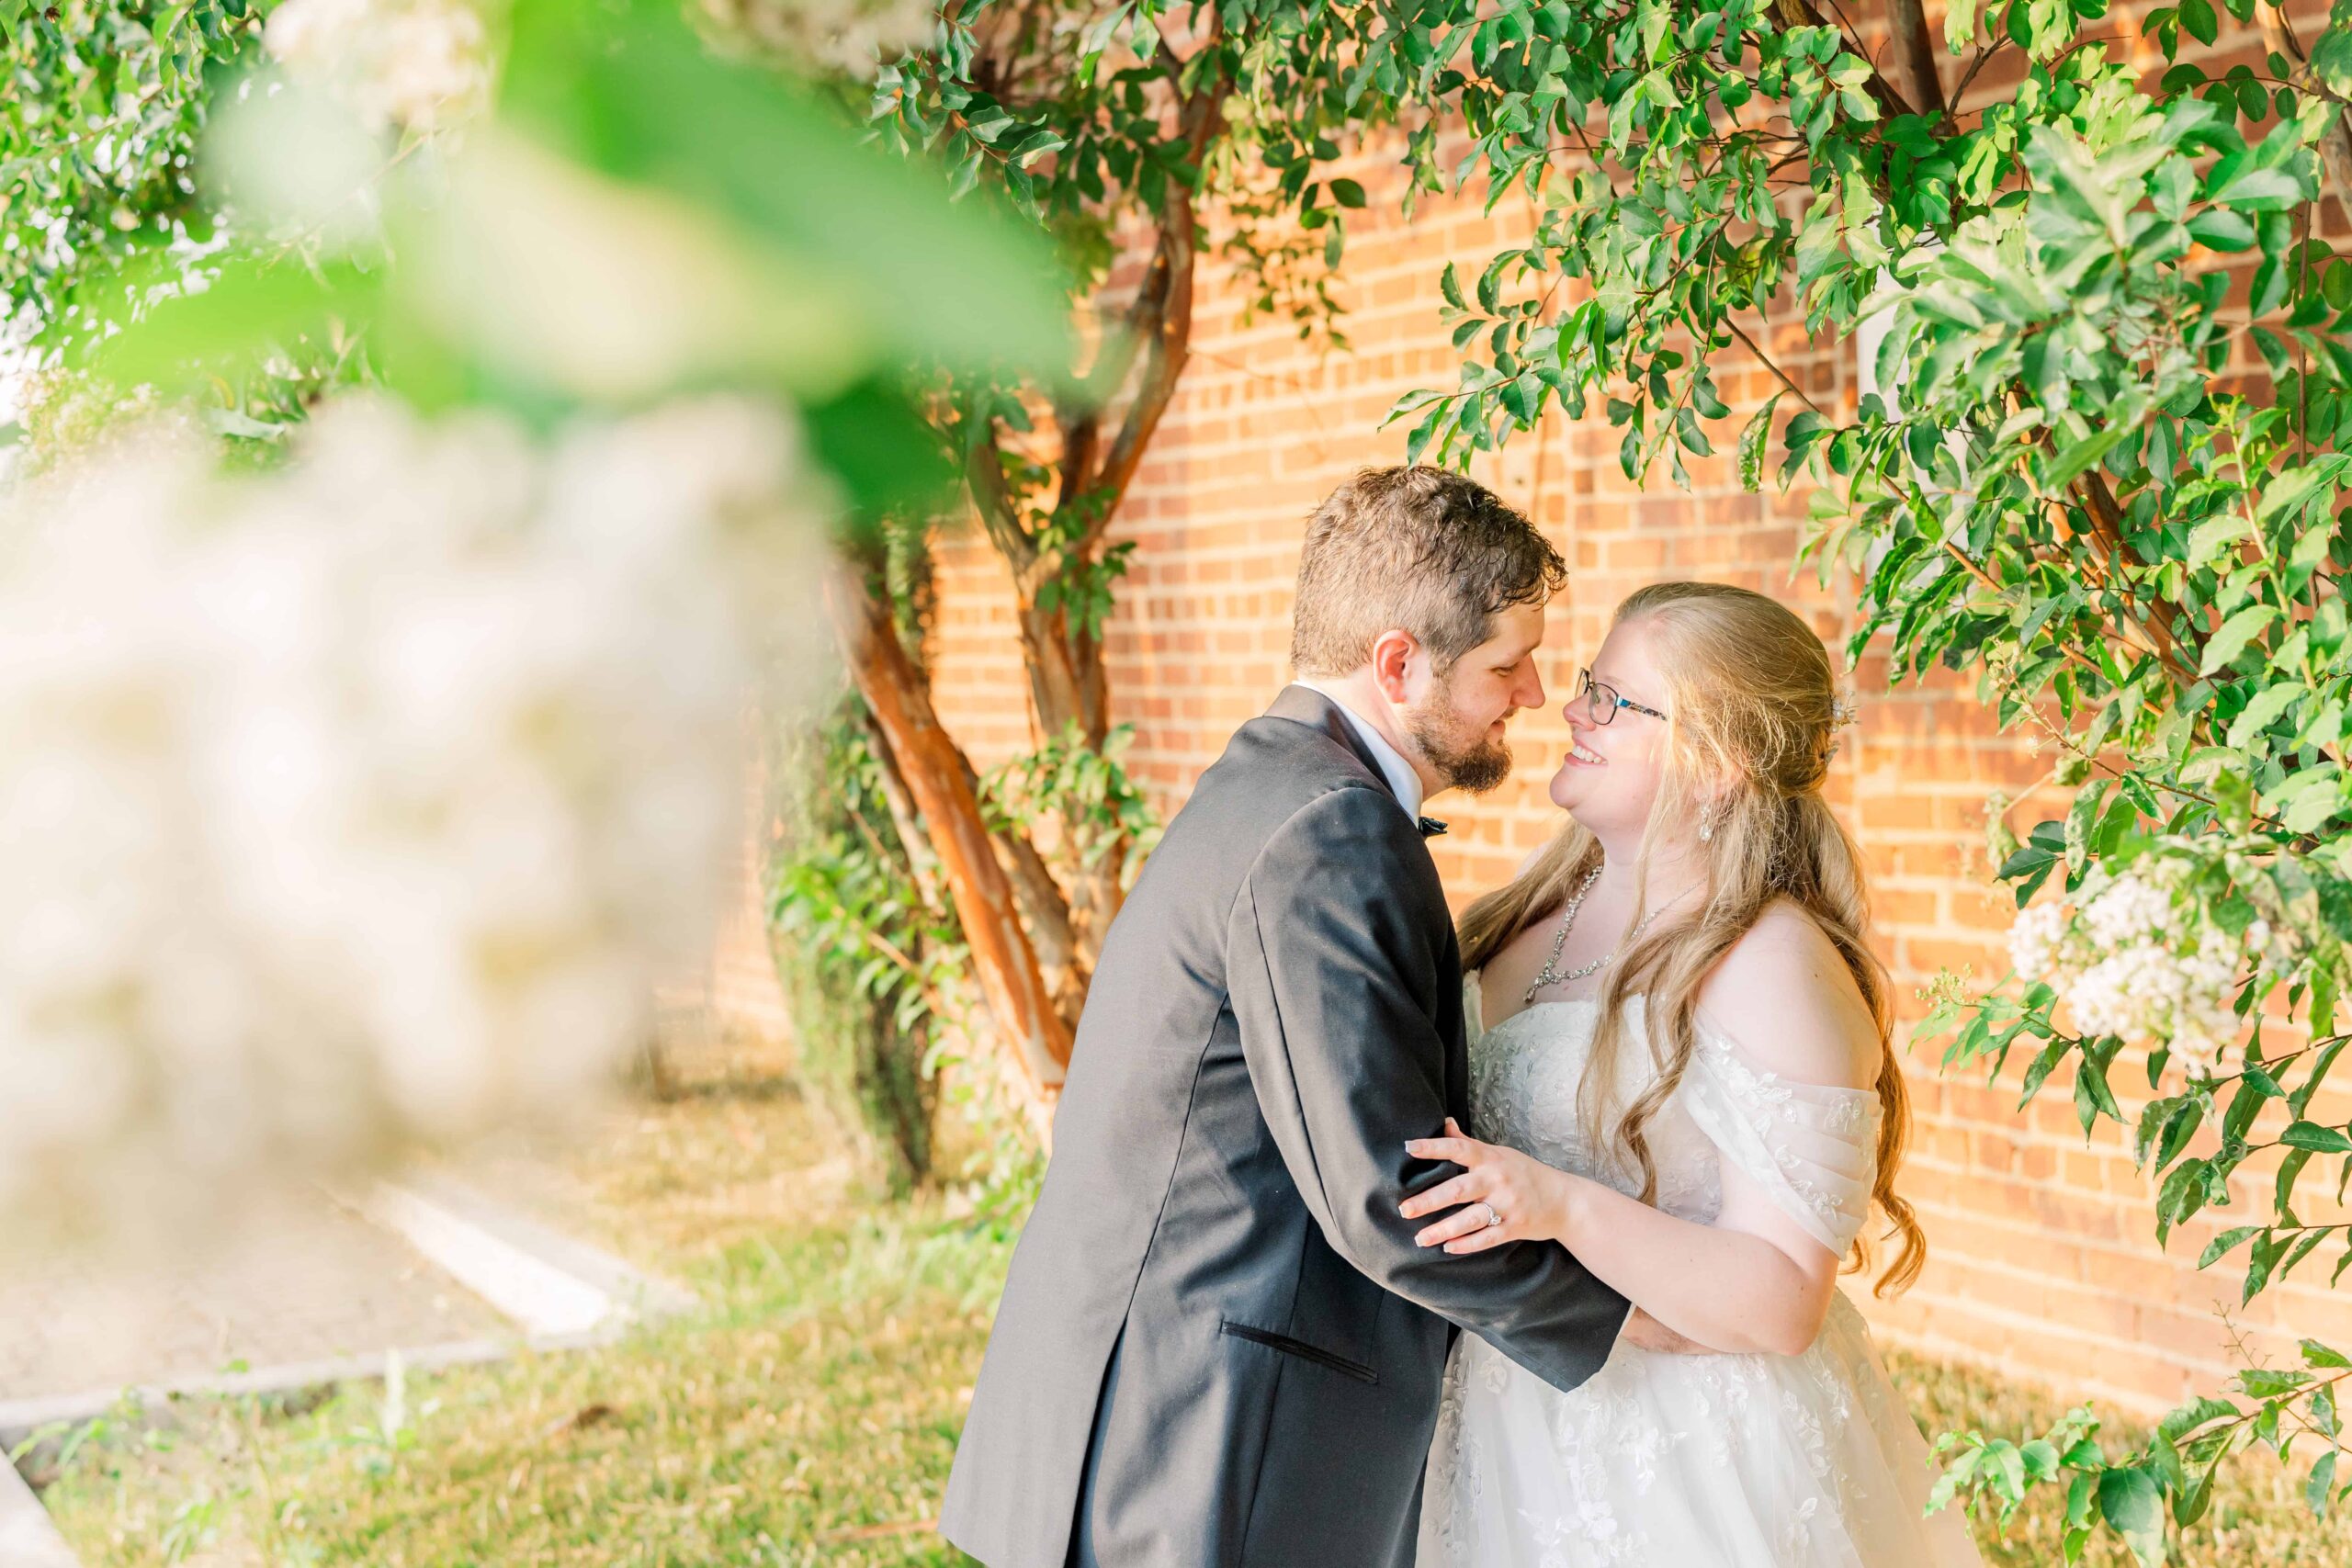 Eric and Erica pose under a blooming, white crepe myrtle tree during their wedding day at warehouse 18 venue in Hickory, NC.